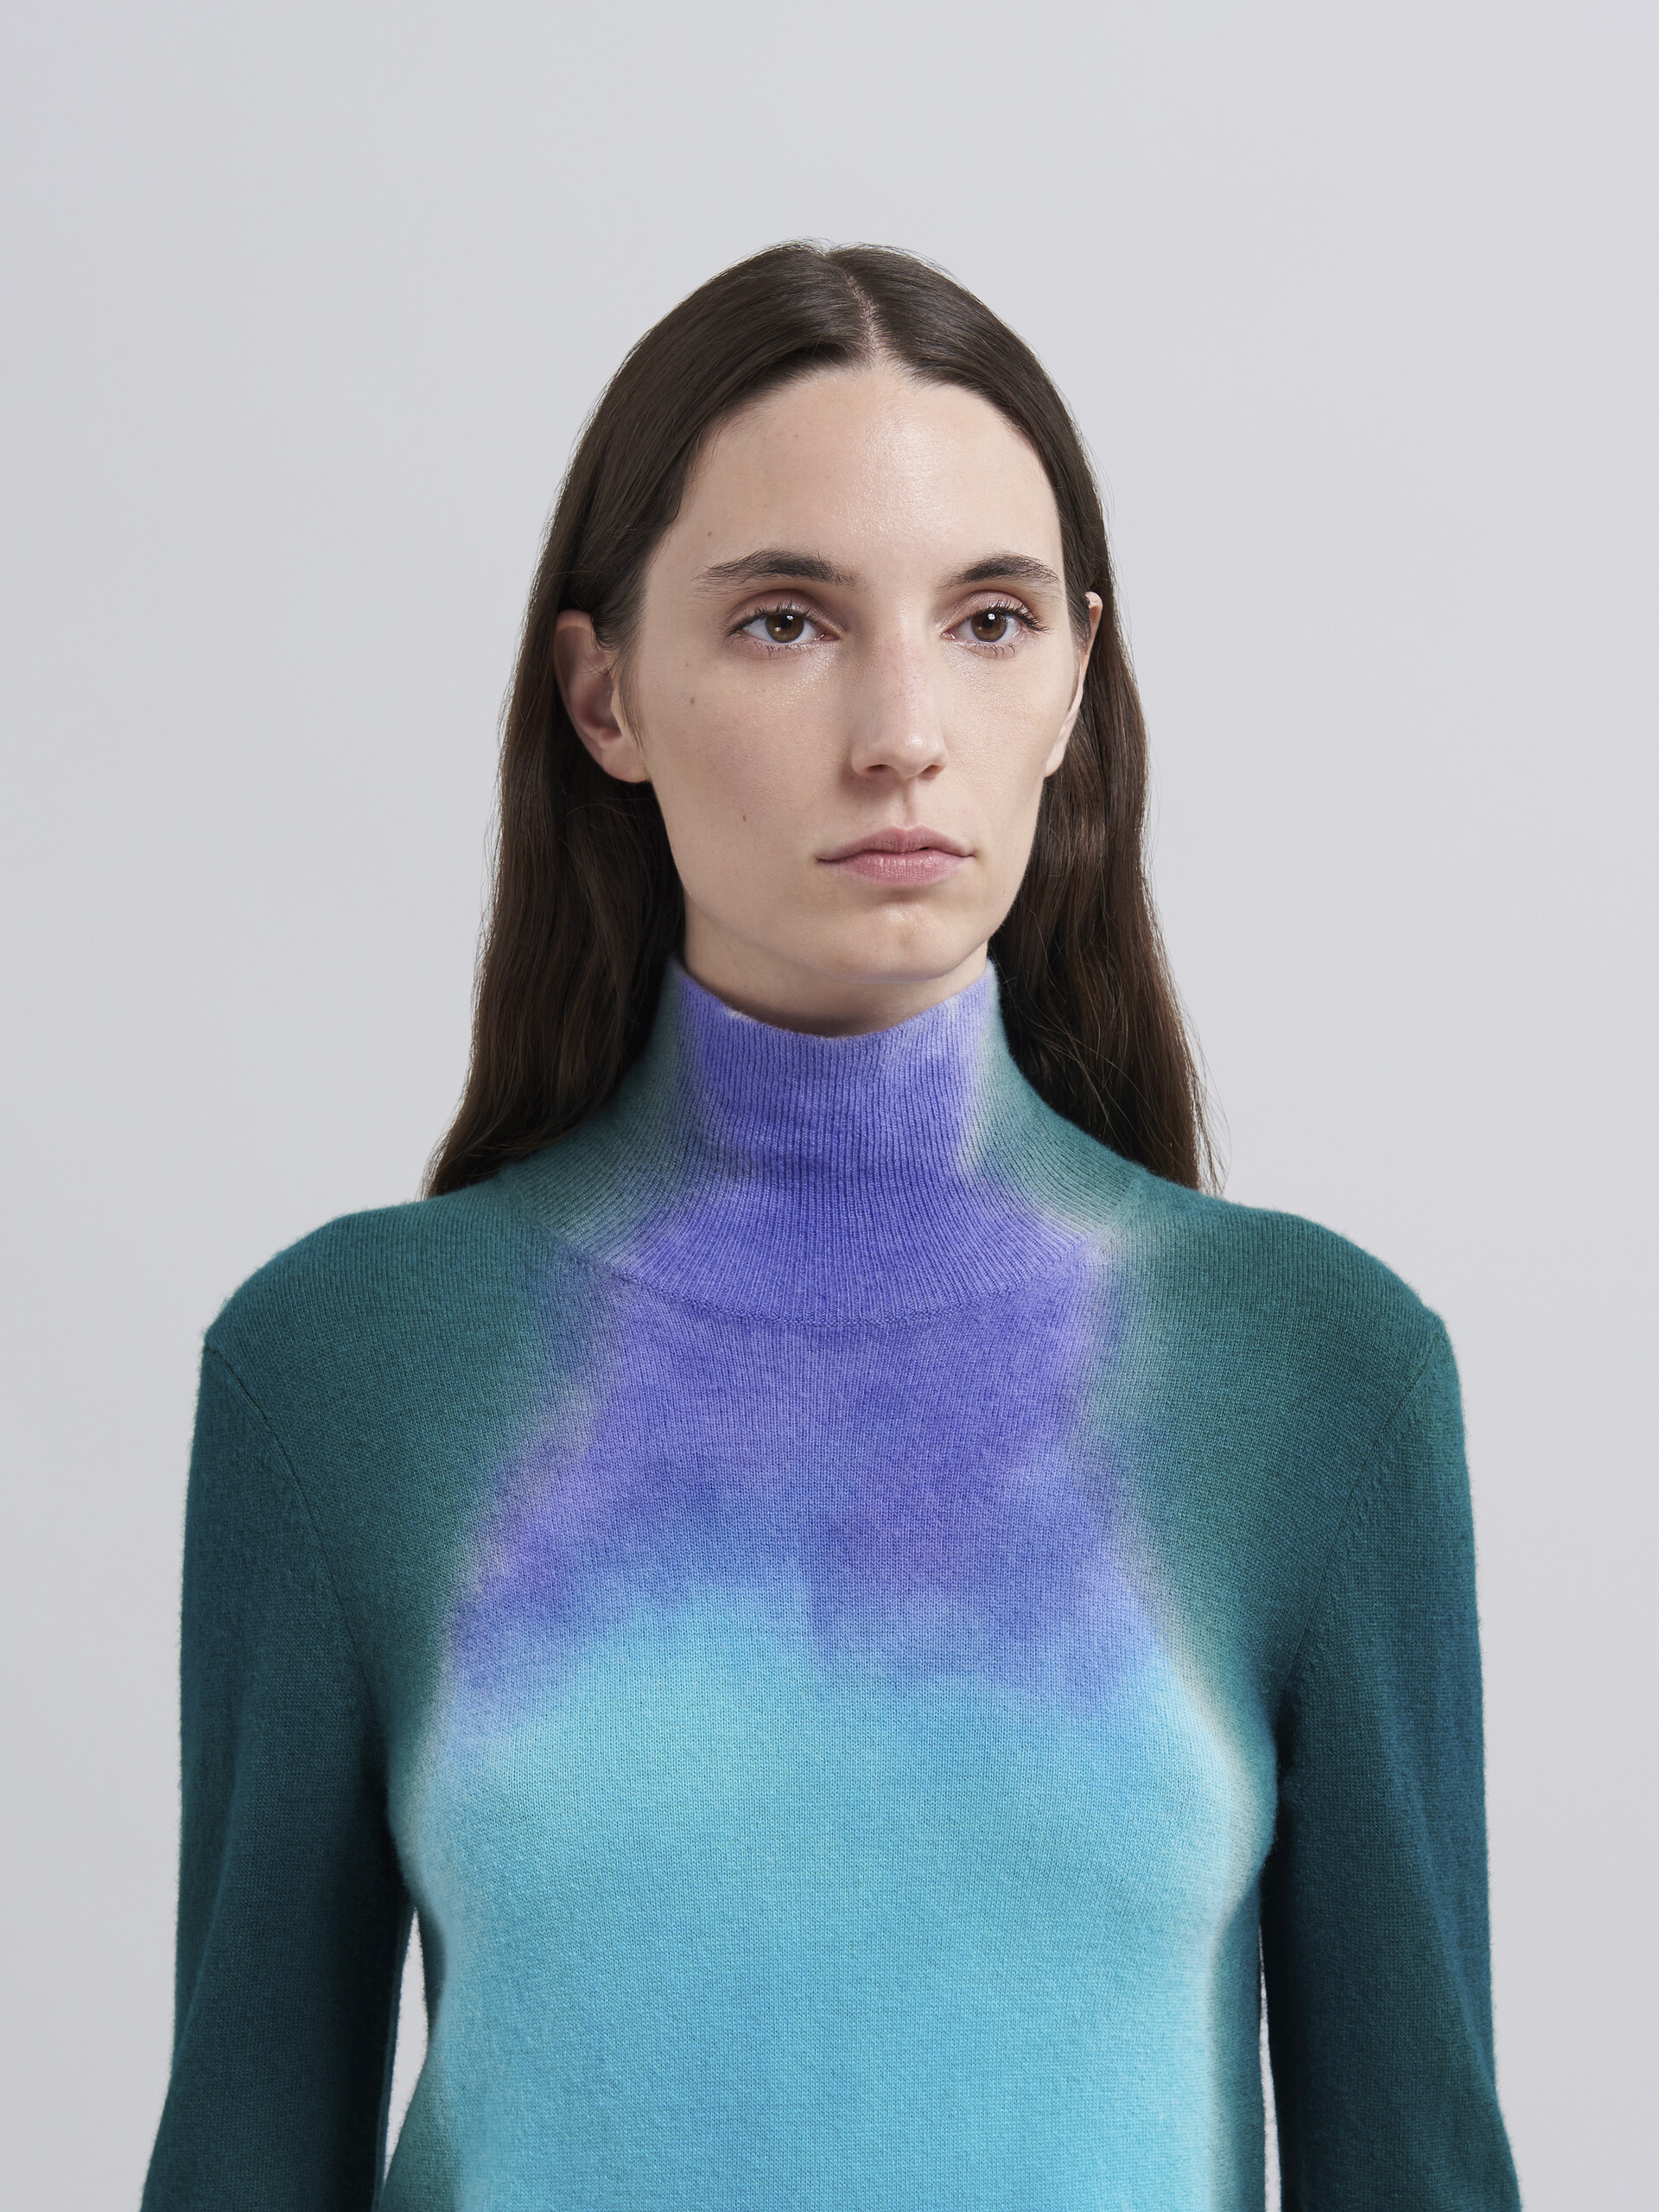 Hand-dyed virgin wool sweater - Pullovers - Image 4